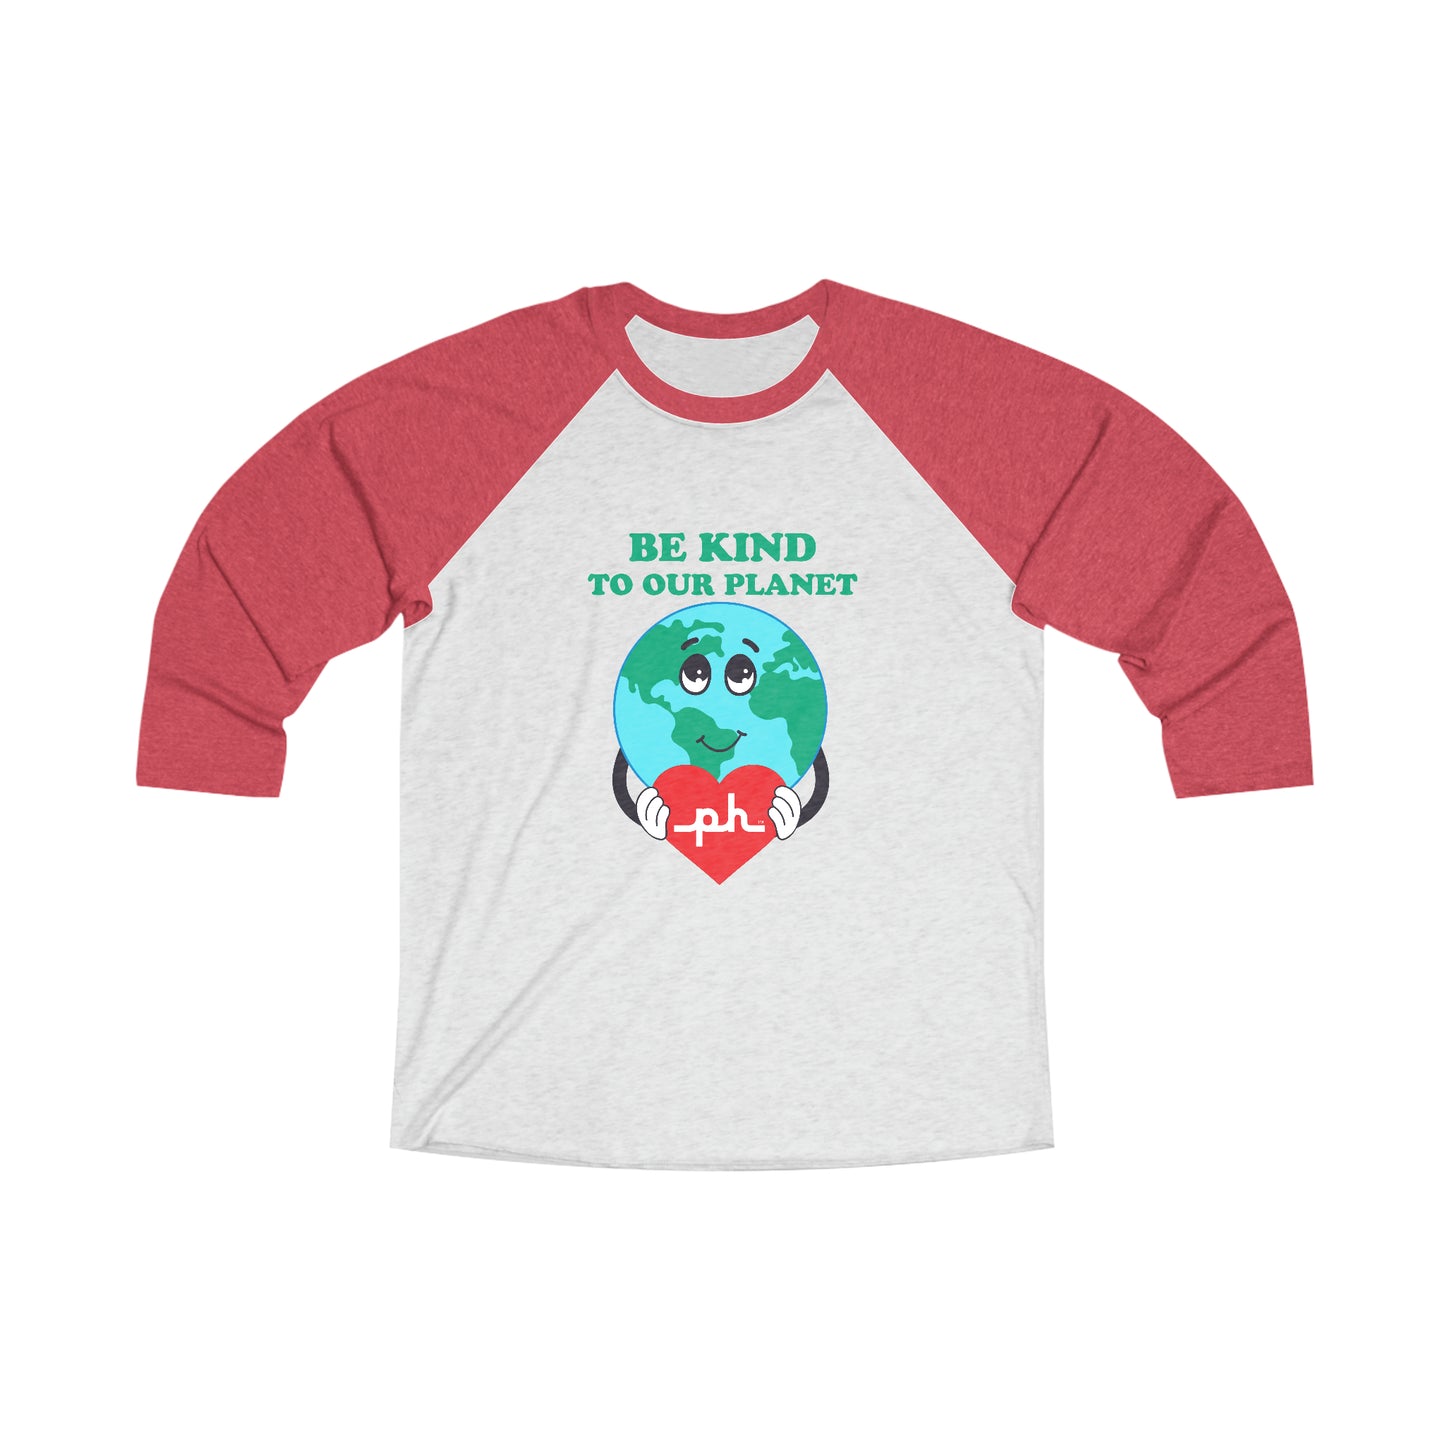 Be Kind To Our Planet Raglan Tee